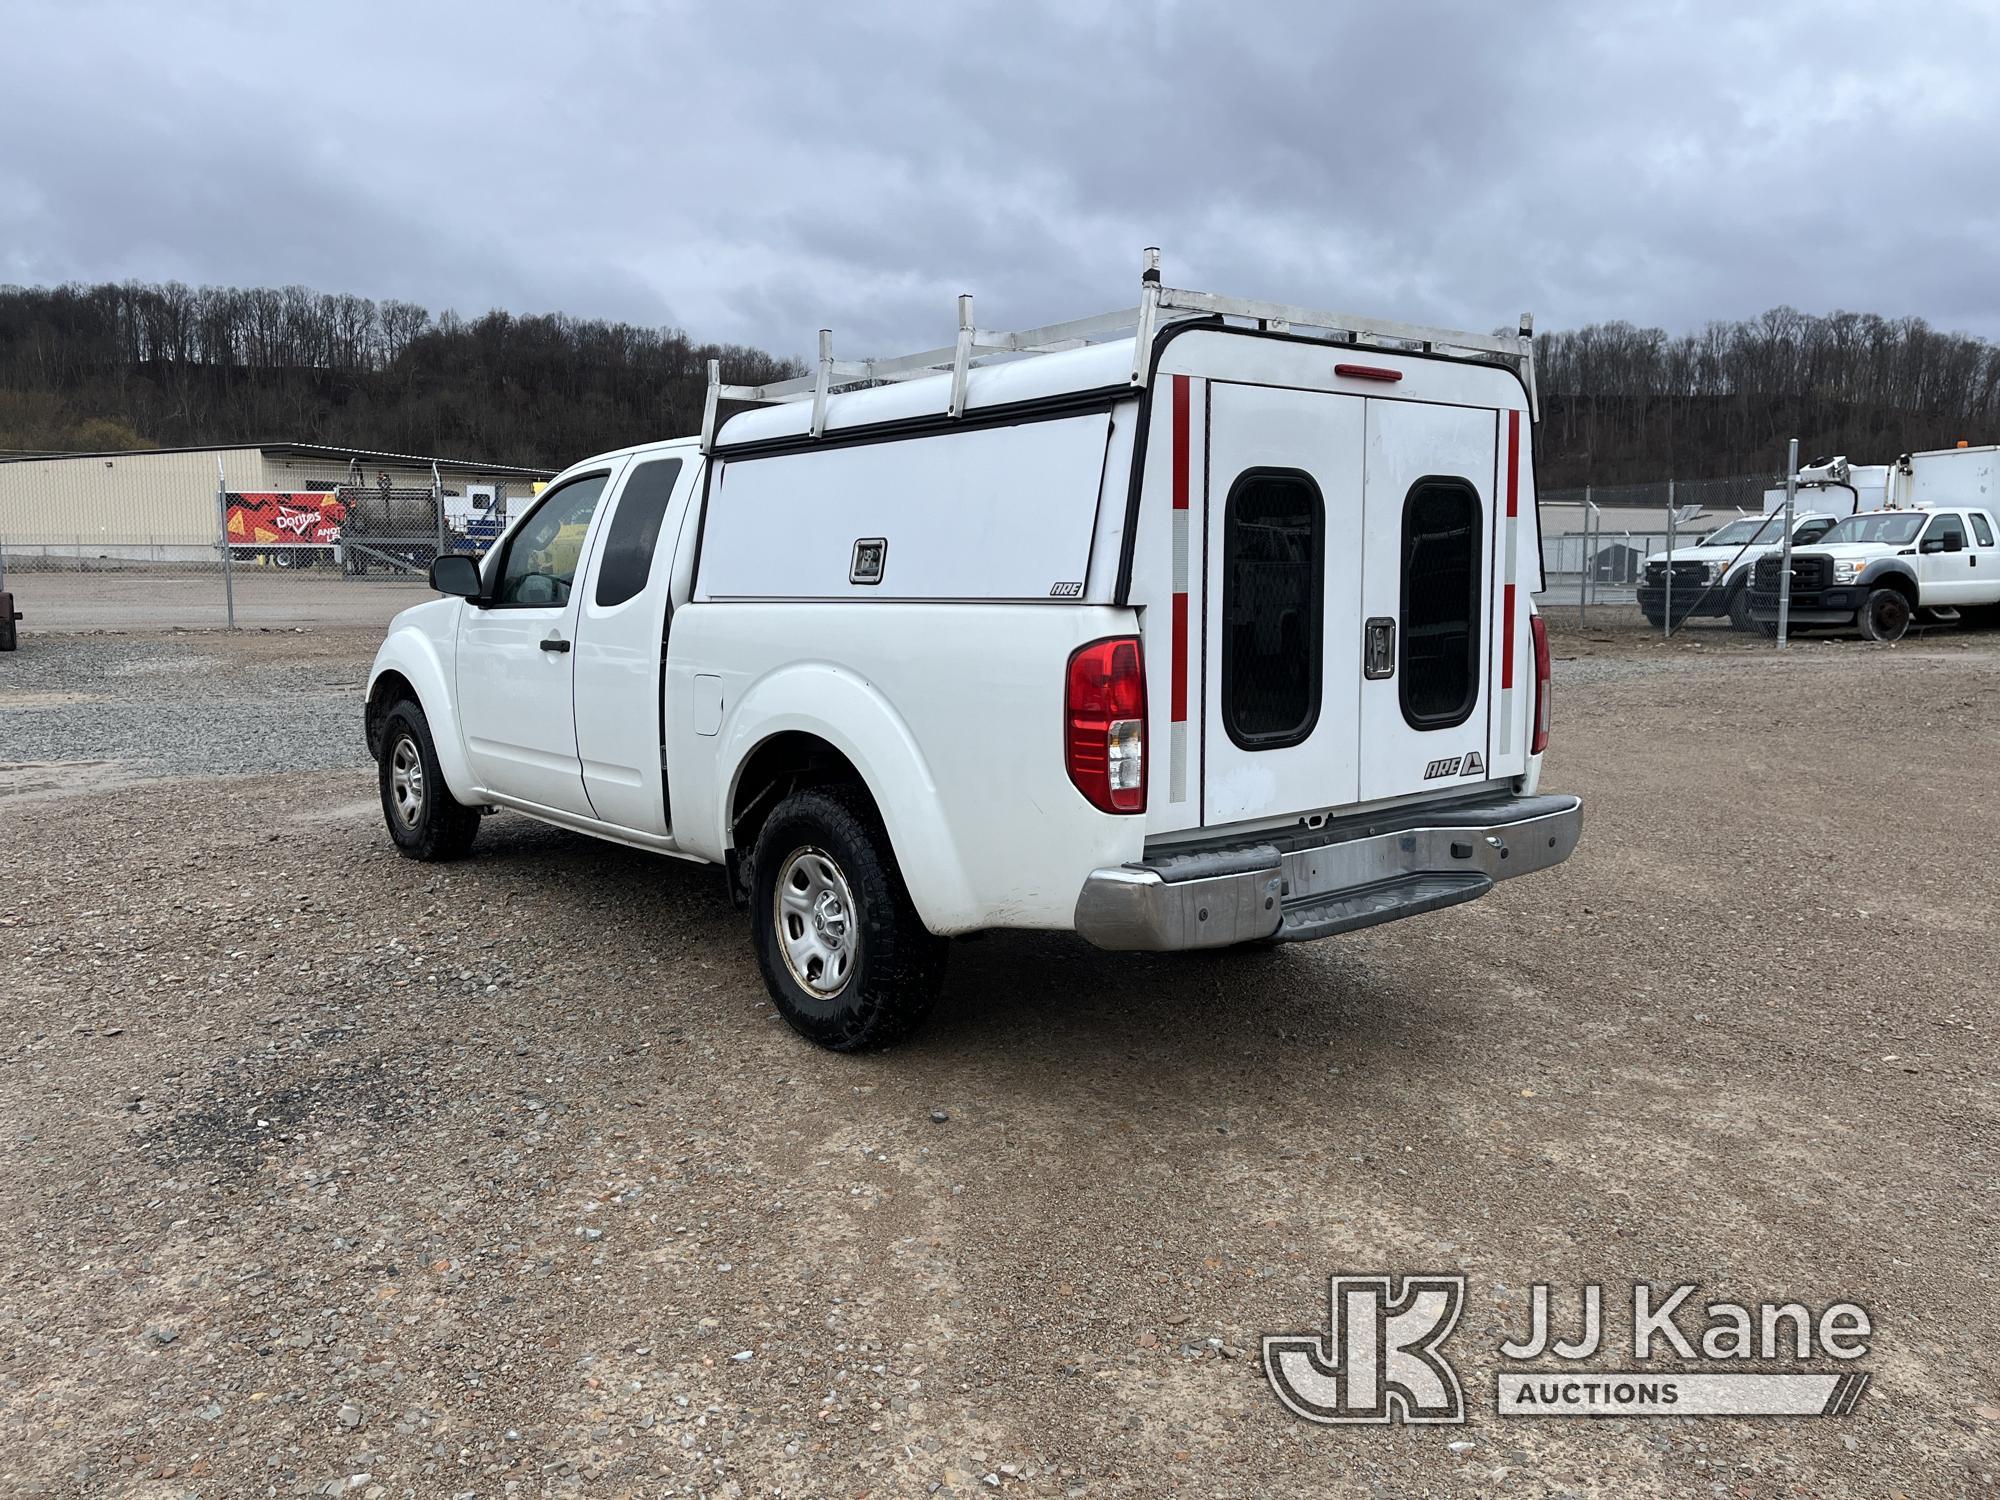 (Smock, PA) 2016 Nissan Frontier Extended-Cab Pickup Truck Runs & Moves, Rust & Paint Damage